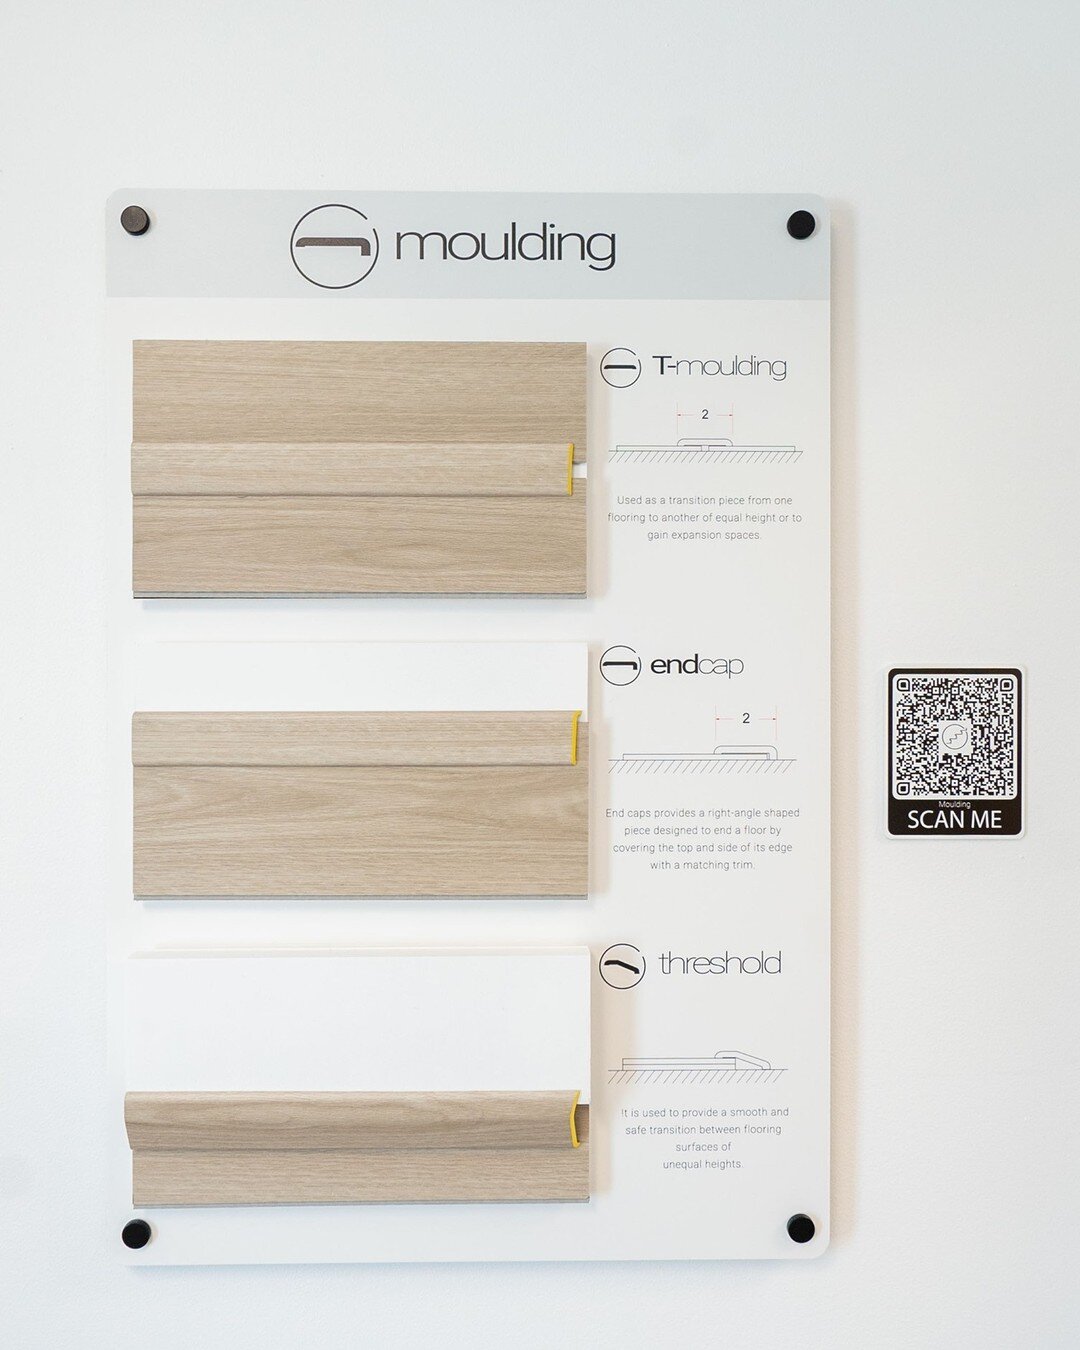 We've got custom mouldings for your floors. Swipe to see the 3 different kinds that will make the perfect solution for your home. 

Link in Bio to request a custom quote and more information!

#homeinspo #homereno #custommoulding #homerenovating #flo